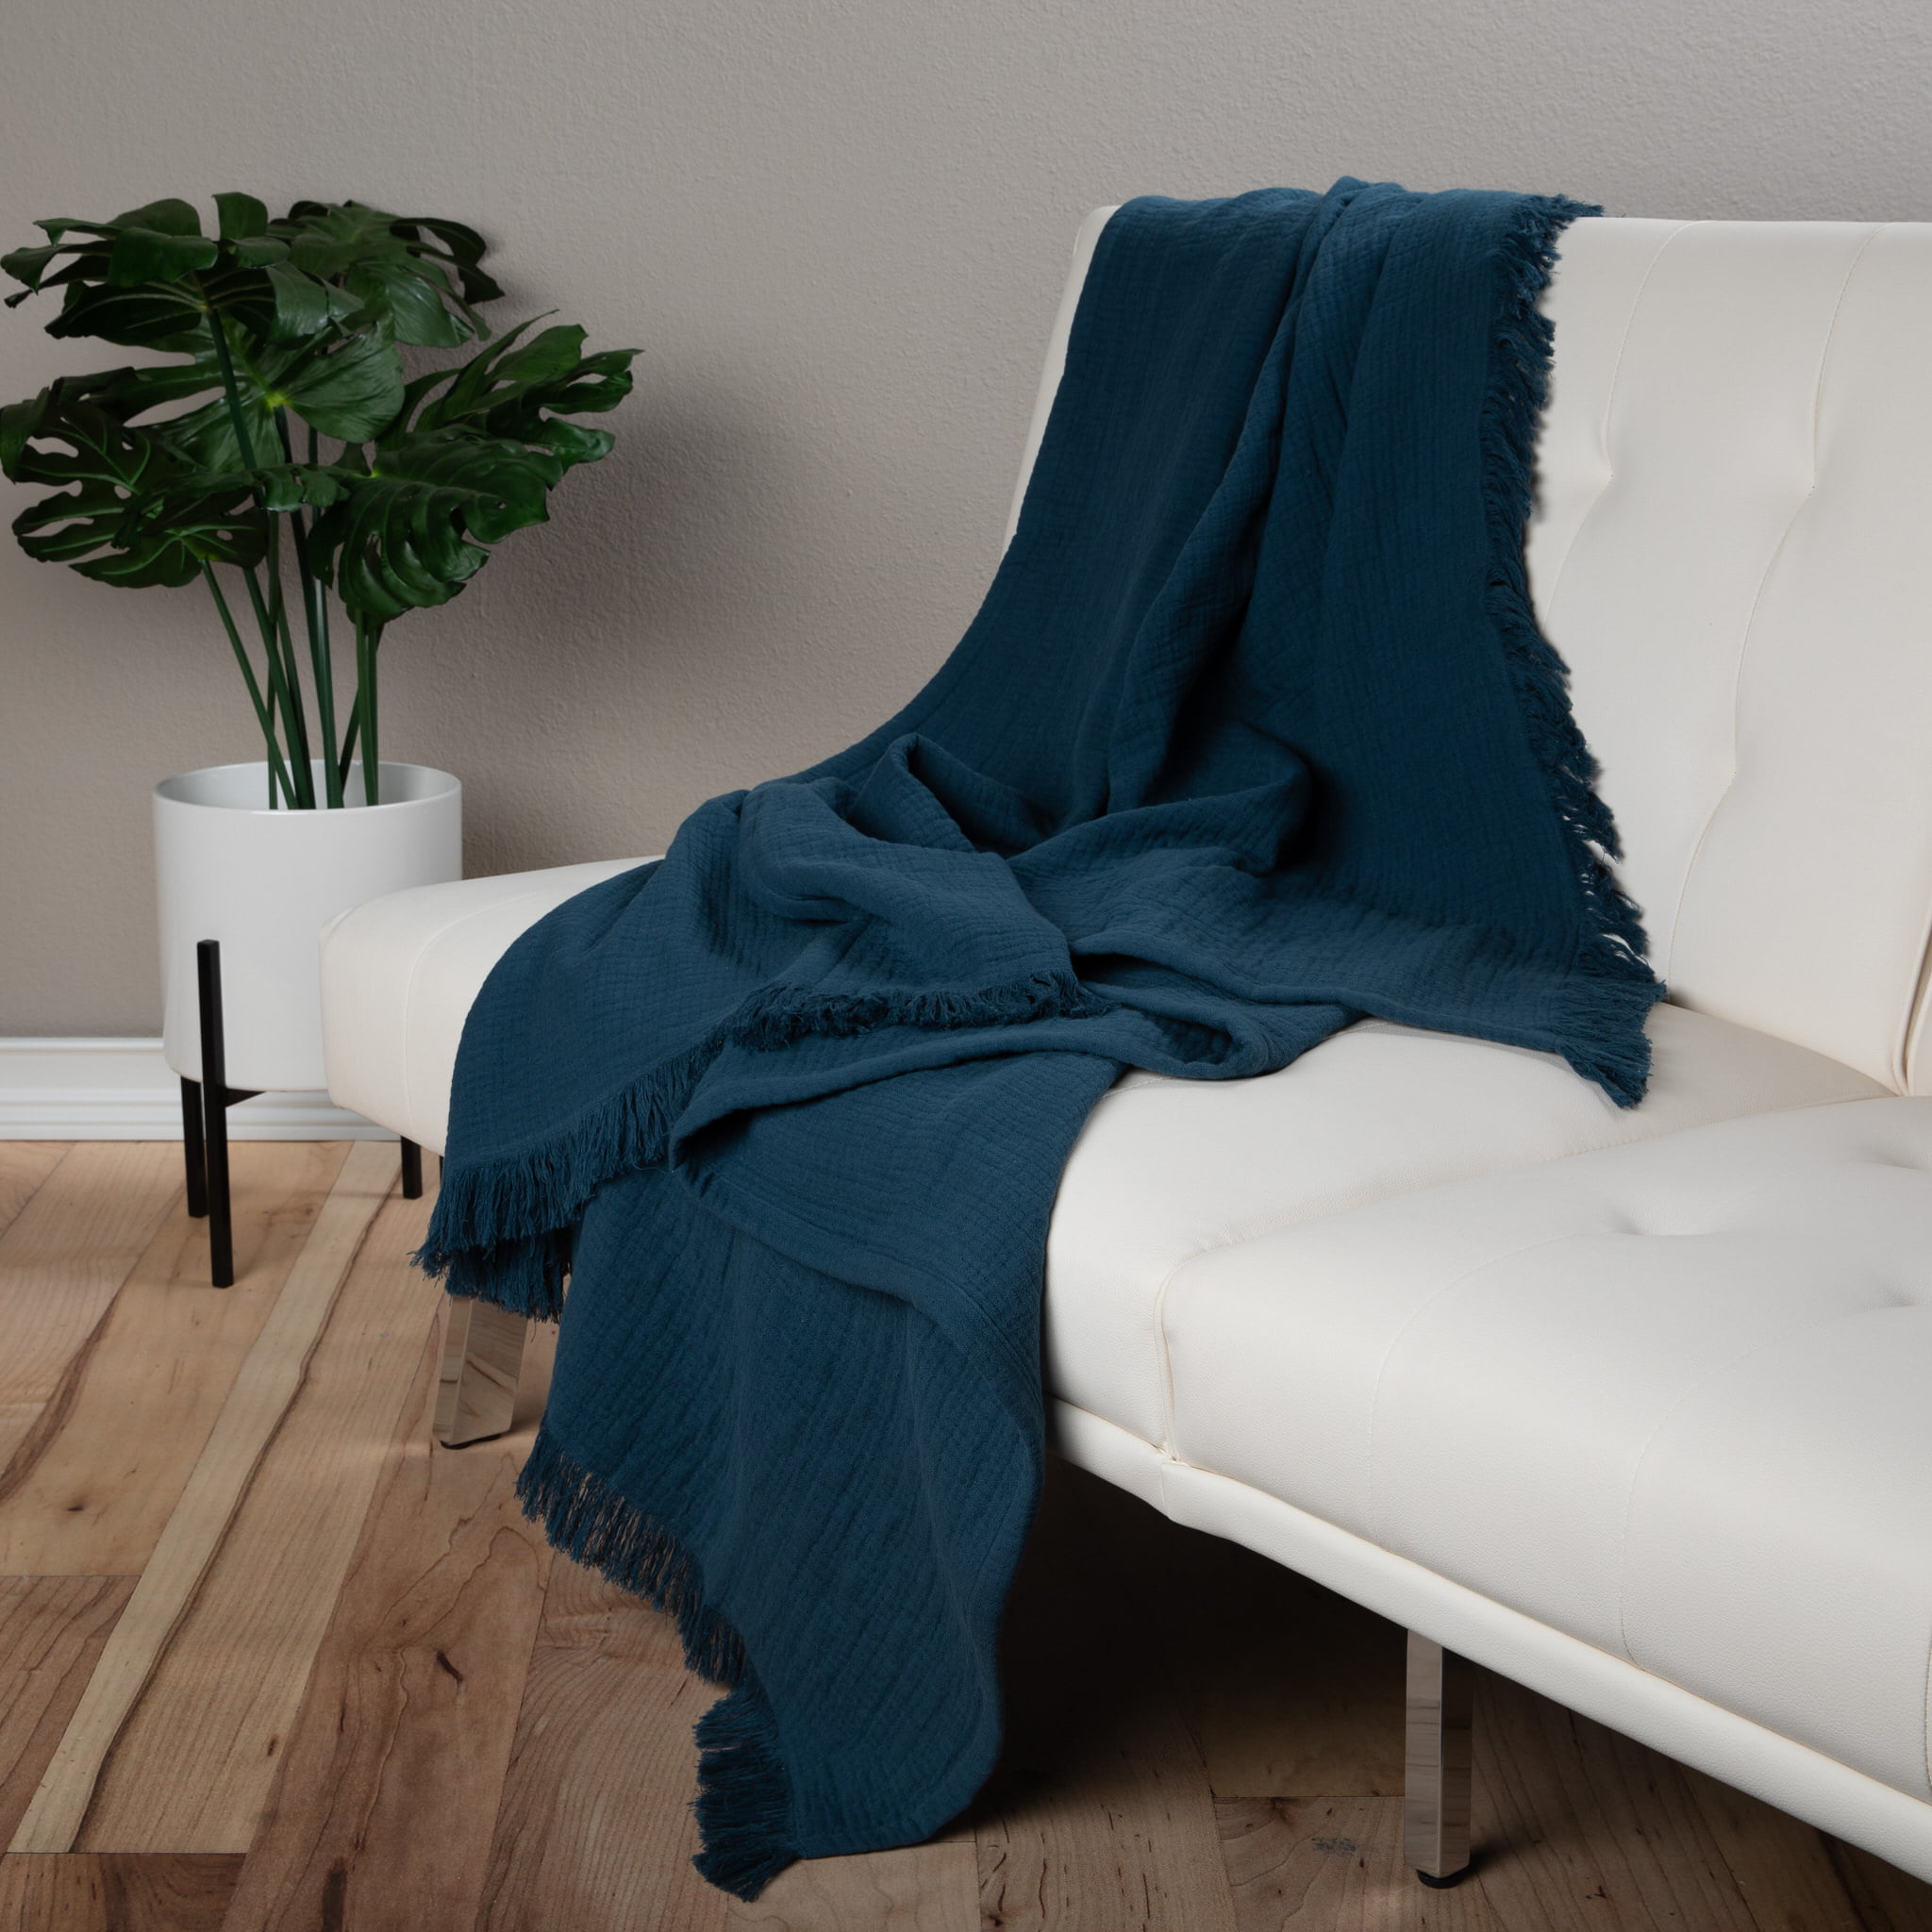 Sticky Toffee Muslin Throw Blanket for Adults, 100% Cotton, 60x50 in, Soft Lightweight and Breathable Throw for Couch, White, Size: 50 x 60